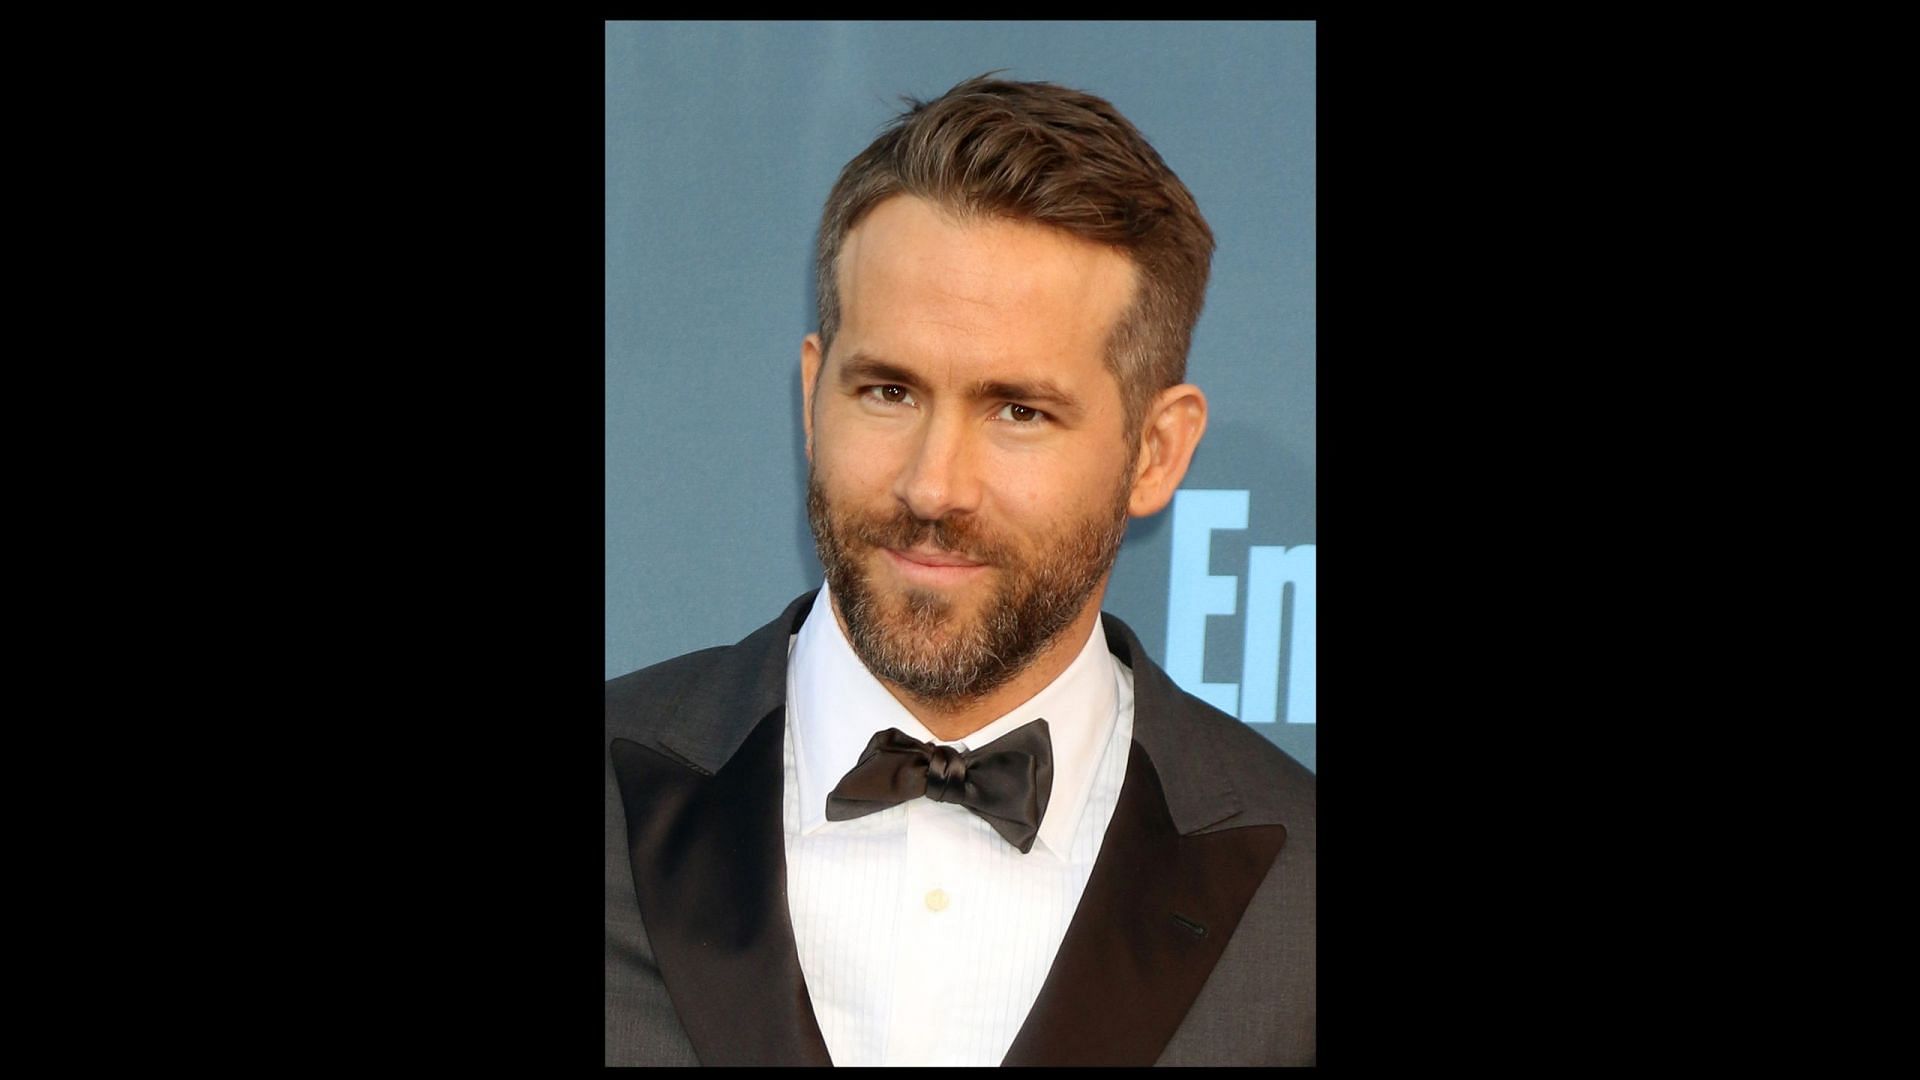 Ryan Reynolds and his experience with anxiety. (Image via Vecteezy/Kathy Hutchins)